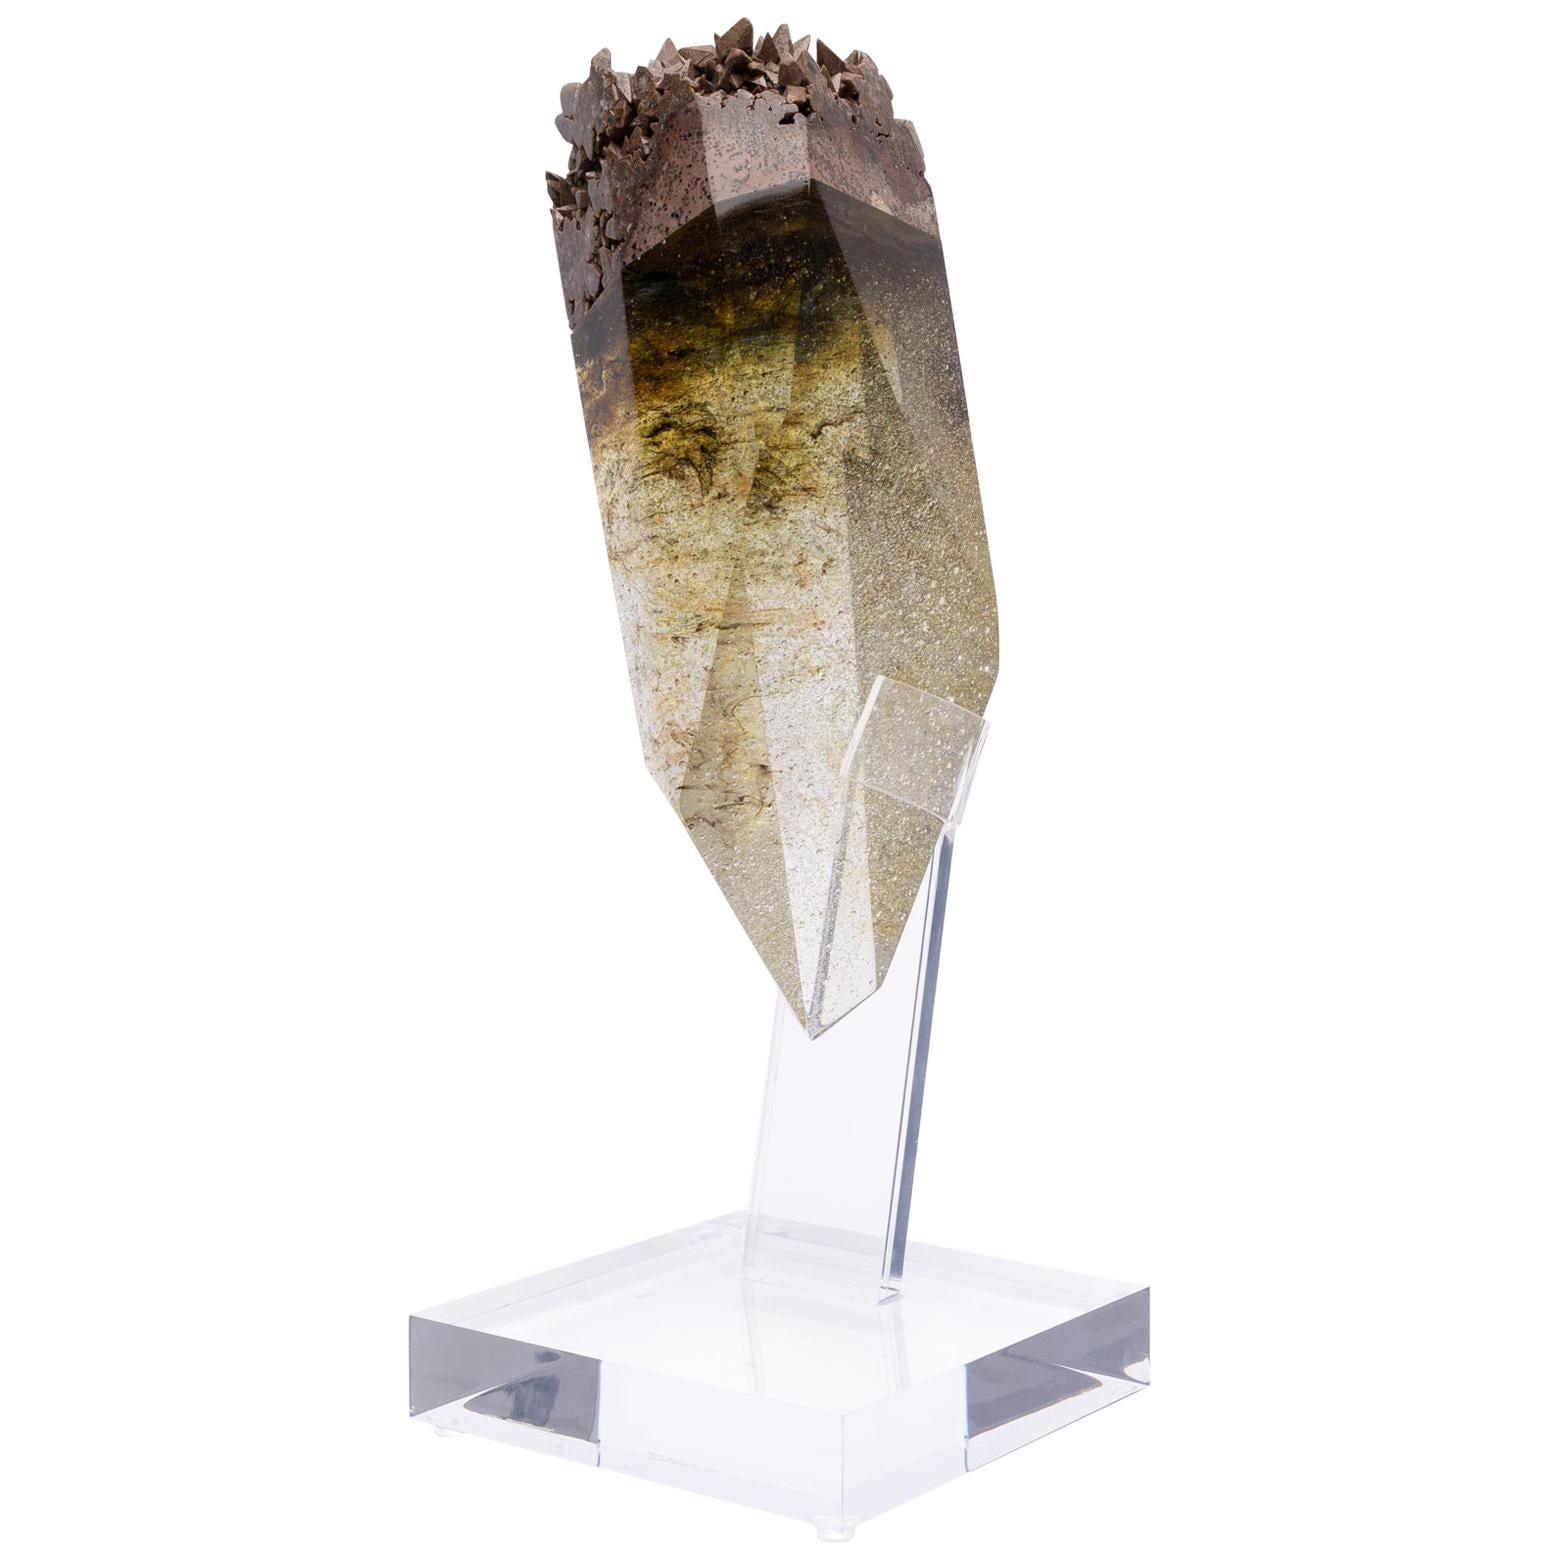 Chocolate Calcite and Glass Sculpture from TYME Collection on Acrylic Base